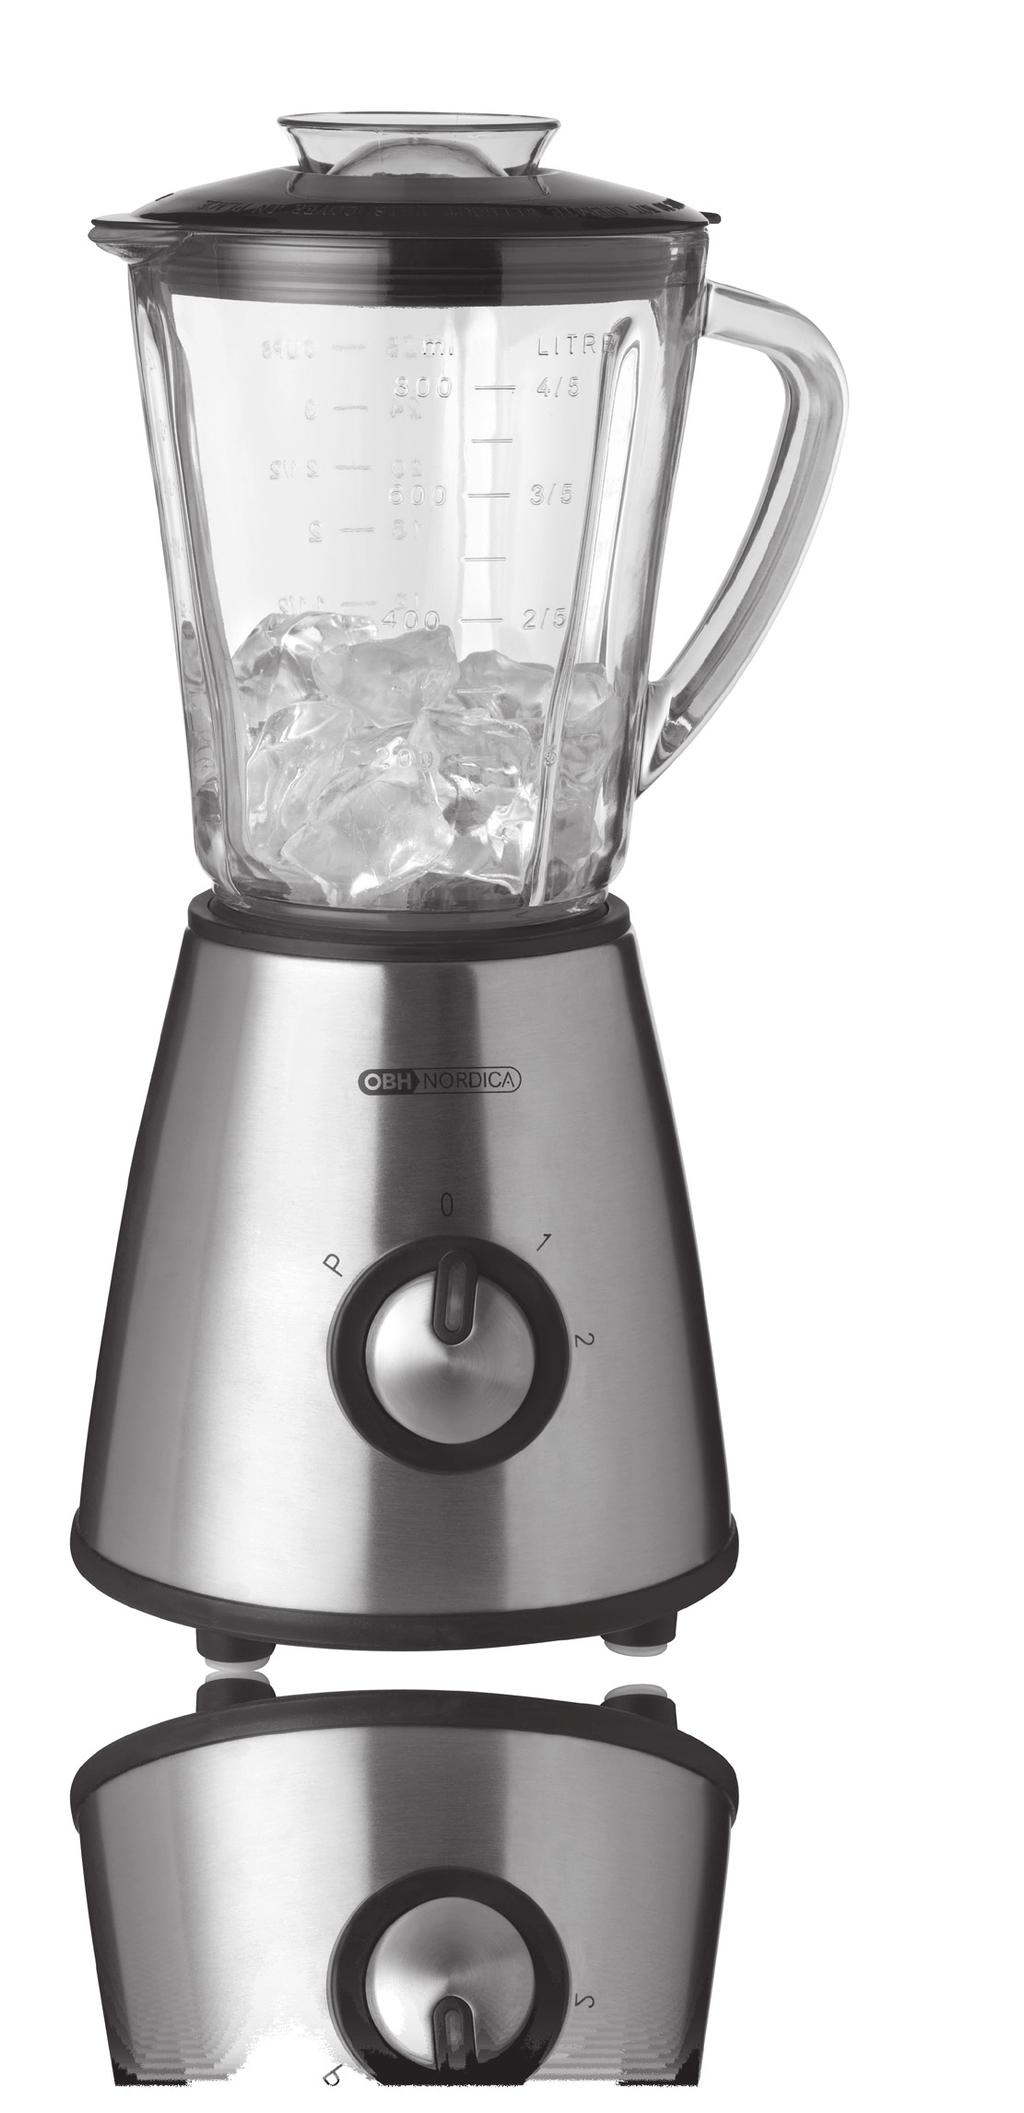 Kitchen stainless piano white steel // // compact blender // // 2 speed settings // 0.